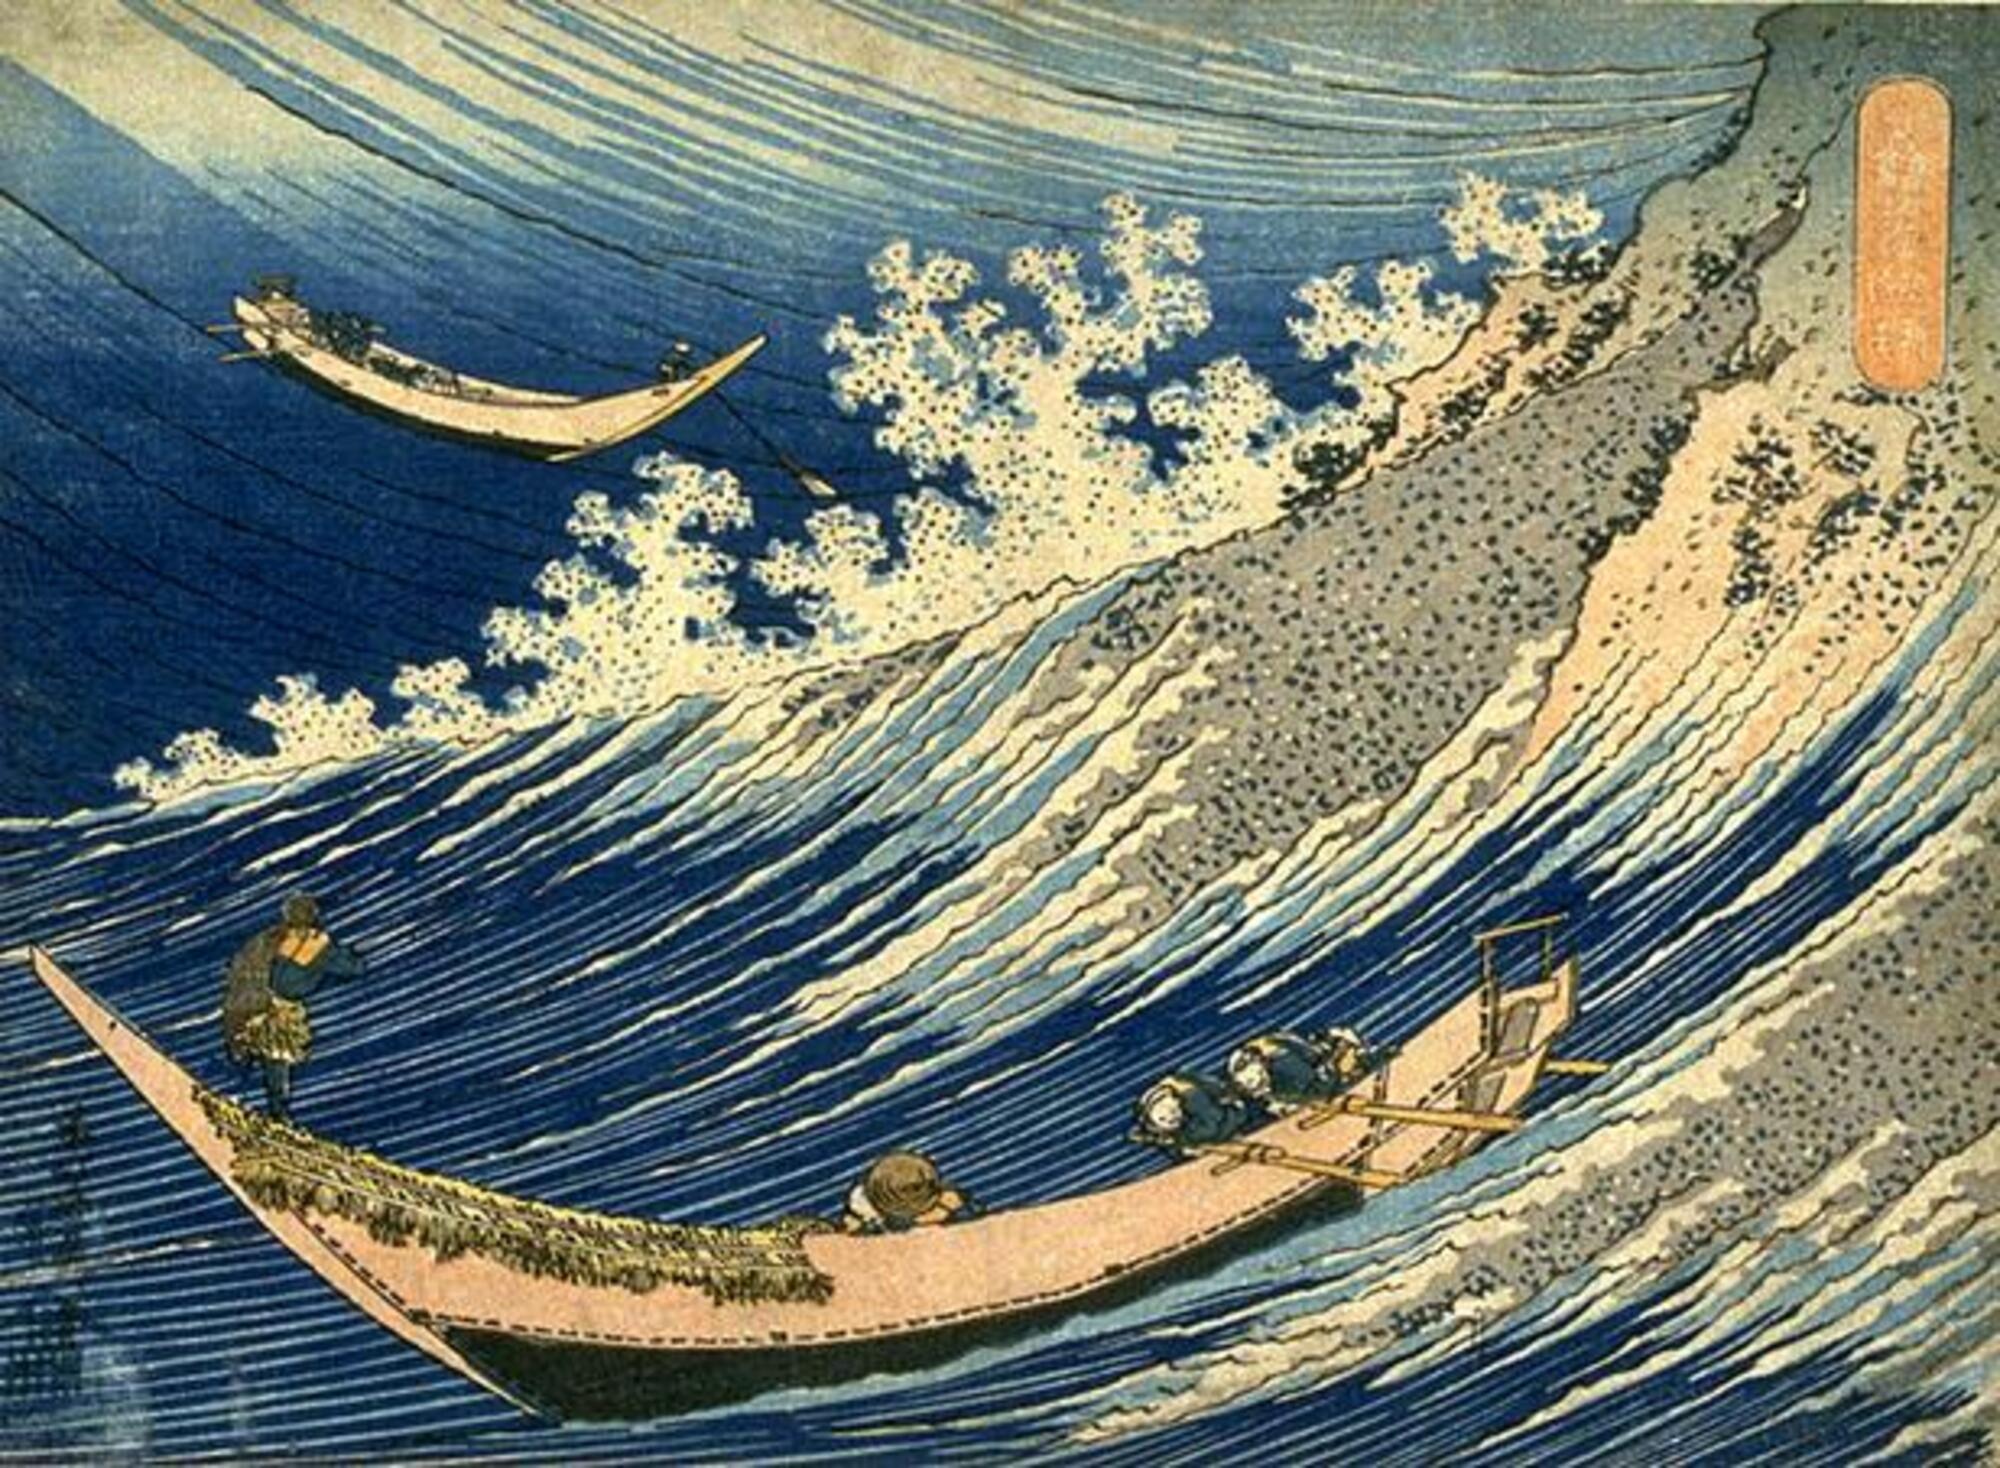 The print depicts two boats that are caught in storms, one in the foreground and one in the background. The parallel waves form a strong diagonal in the image and the boats could hardly stay upright.